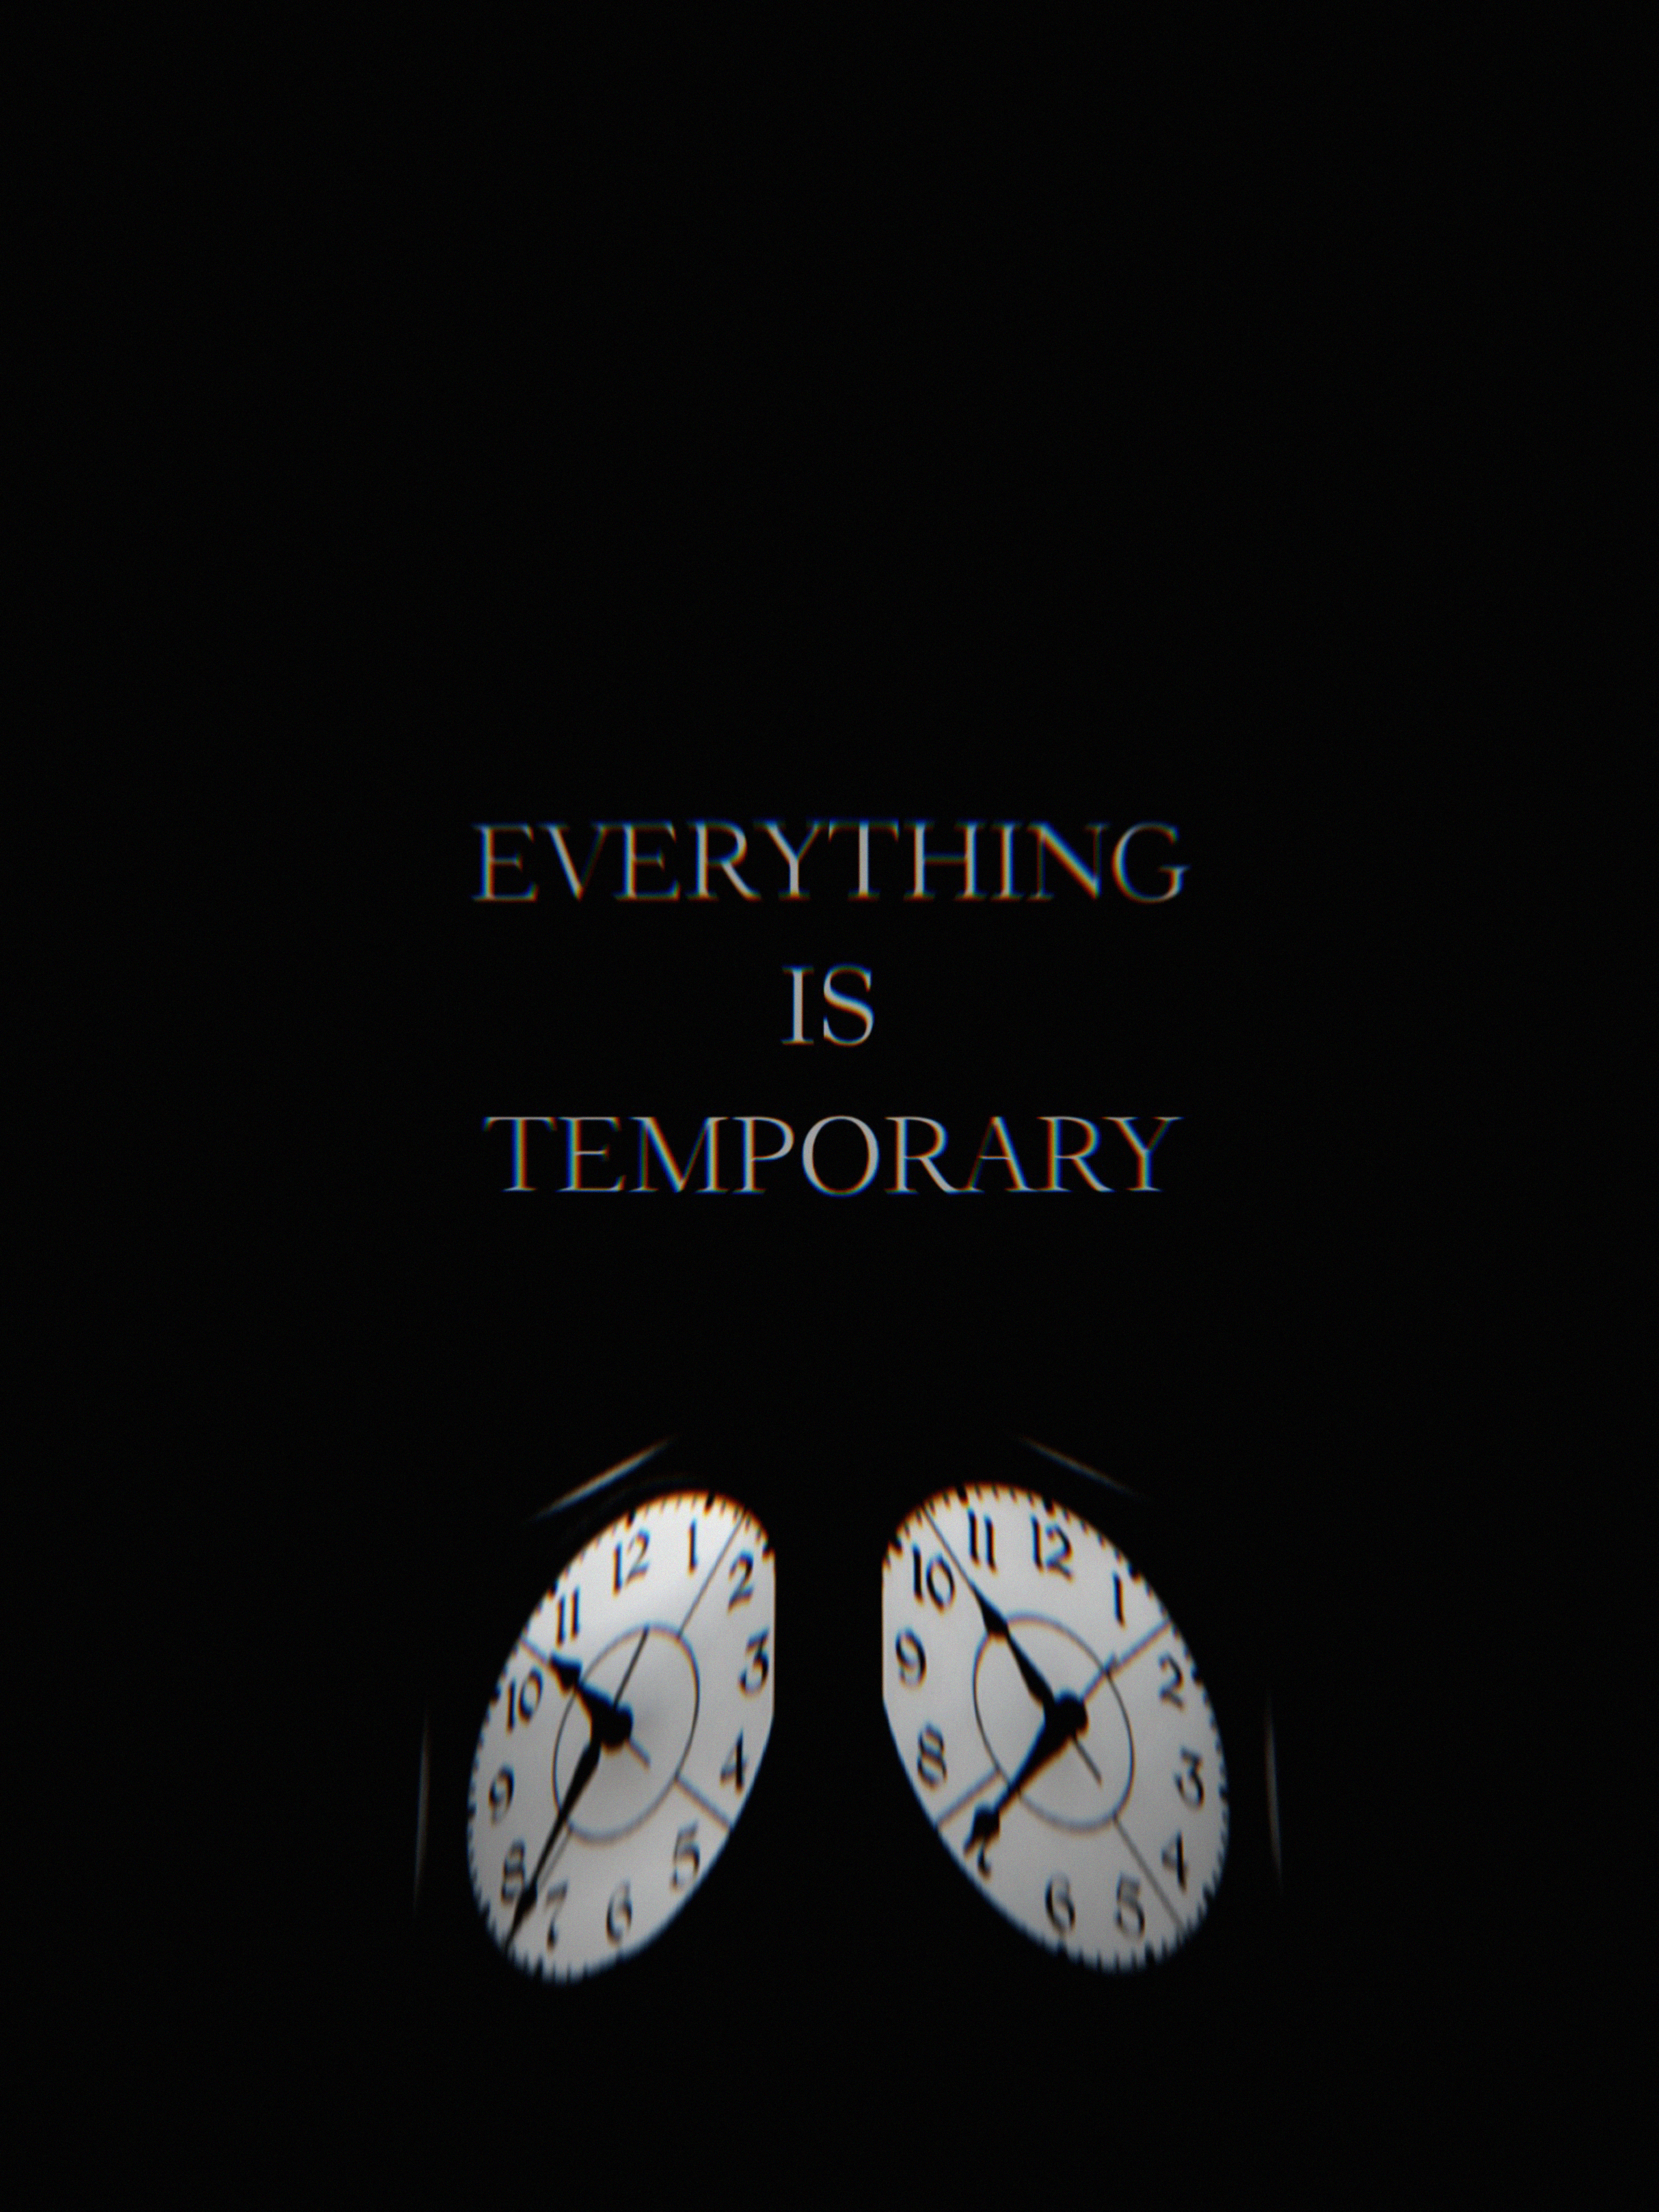 vertical wallpaper life, clock, words, glitch, time, it's time, temporary